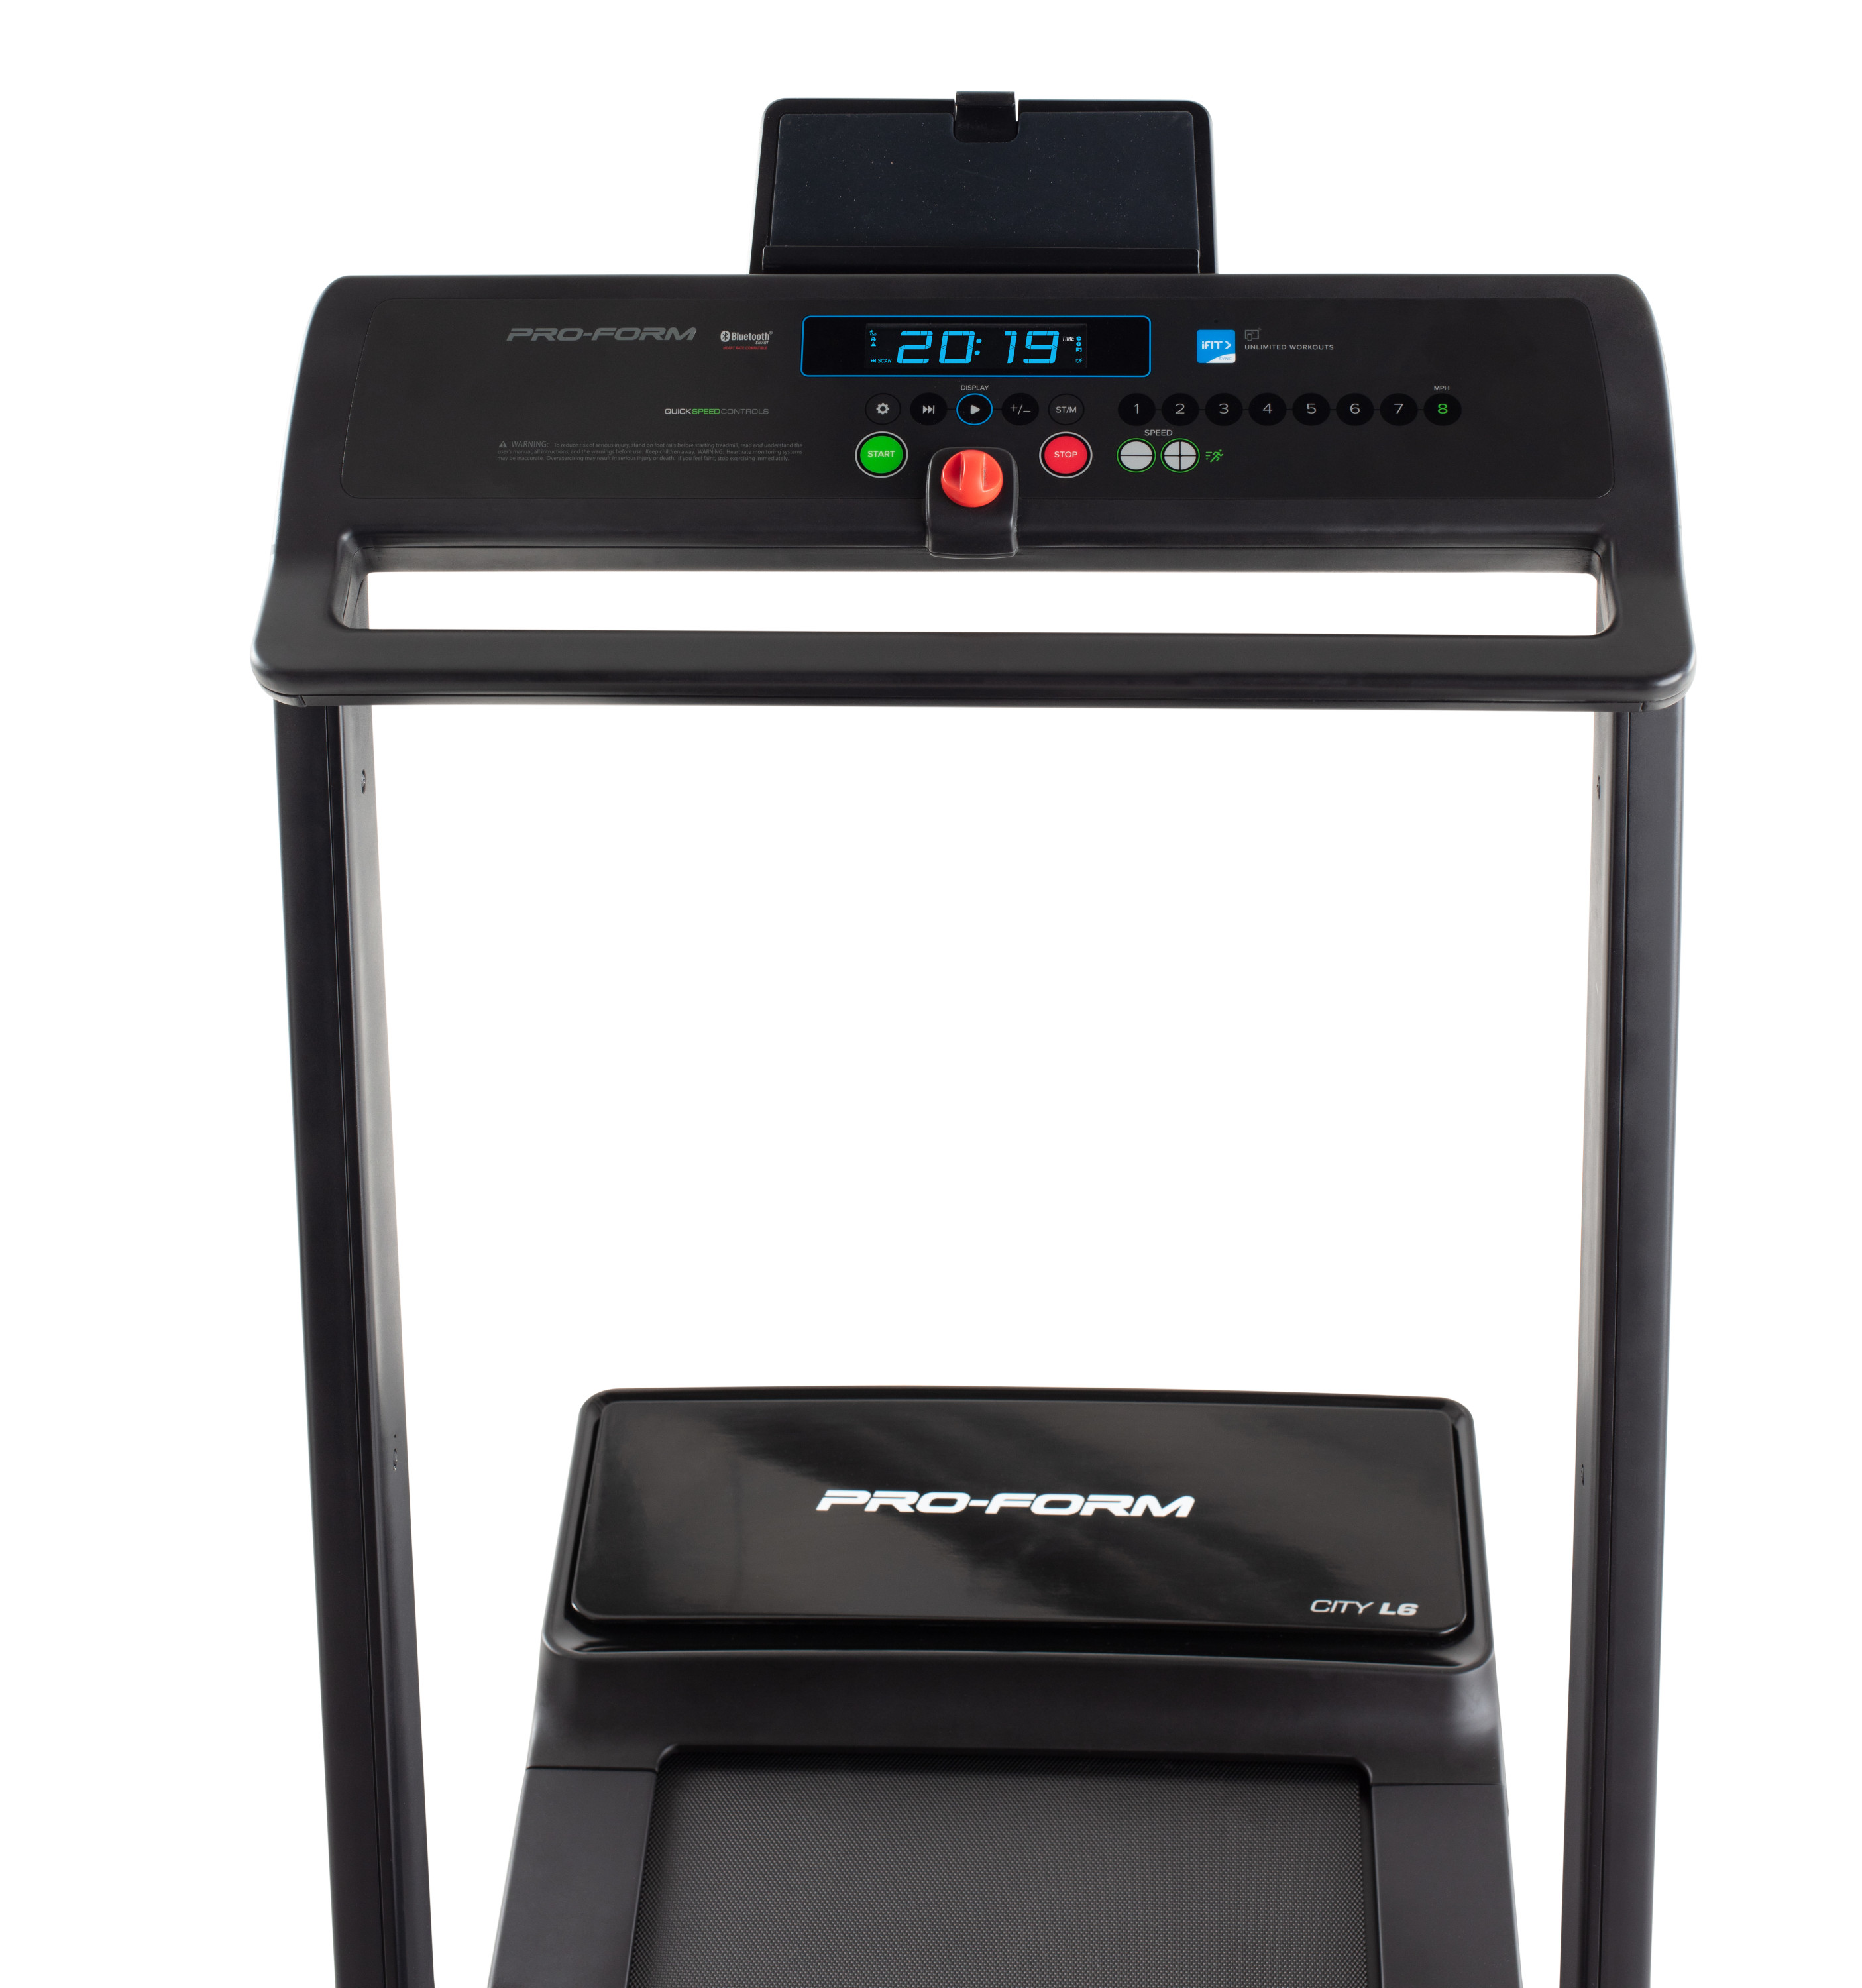 ProForm City L6 Folding Exercise Treadmill with Automatic Trainer Control - image 4 of 13